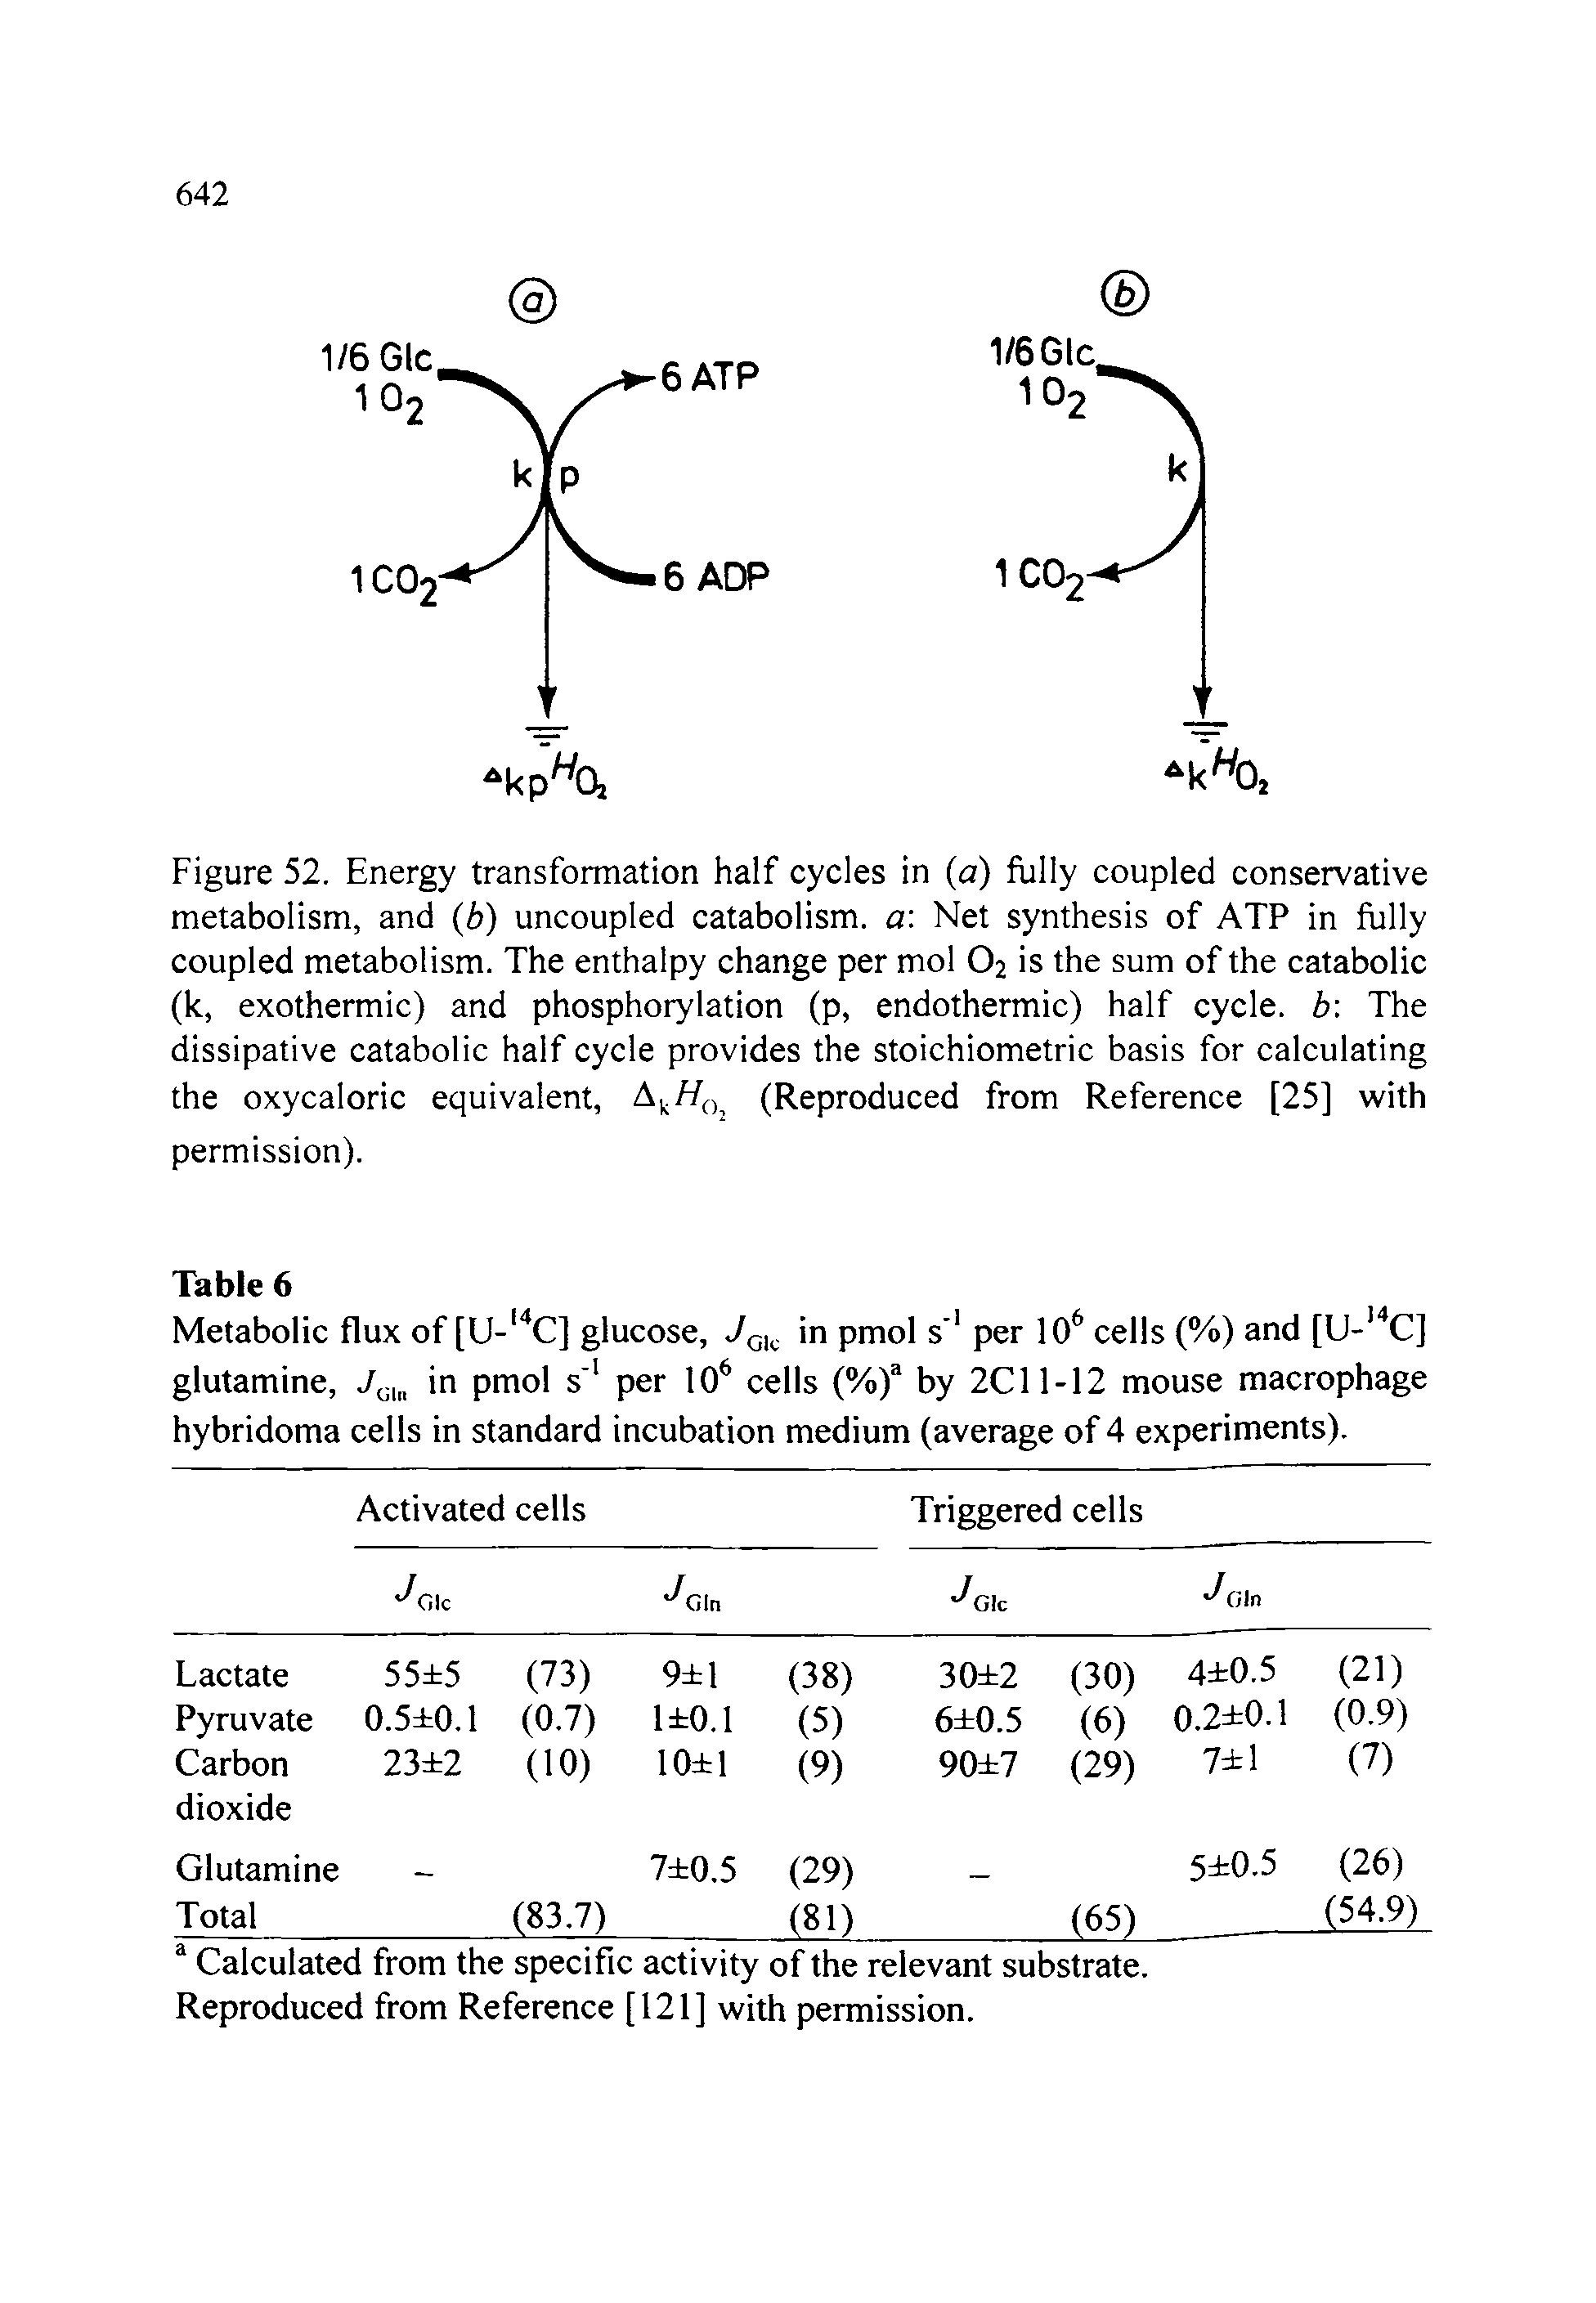 Figure 52. Energy transformation half cycles in (a) fully coupled conservative metabolism, and (b) uncoupled catabolism, a Net synthesis of ATP in fully coupled metabolism. The enthalpy change per mol O2 is the sum of the catabolic (k, exothermic) and phosphorylation (p, endothermic) half cycle, b The dissipative catabolic half cycle provides the stoichiometric basis for calculating the oxycaloric equivalent, (Reproduced from Reference [25] with...